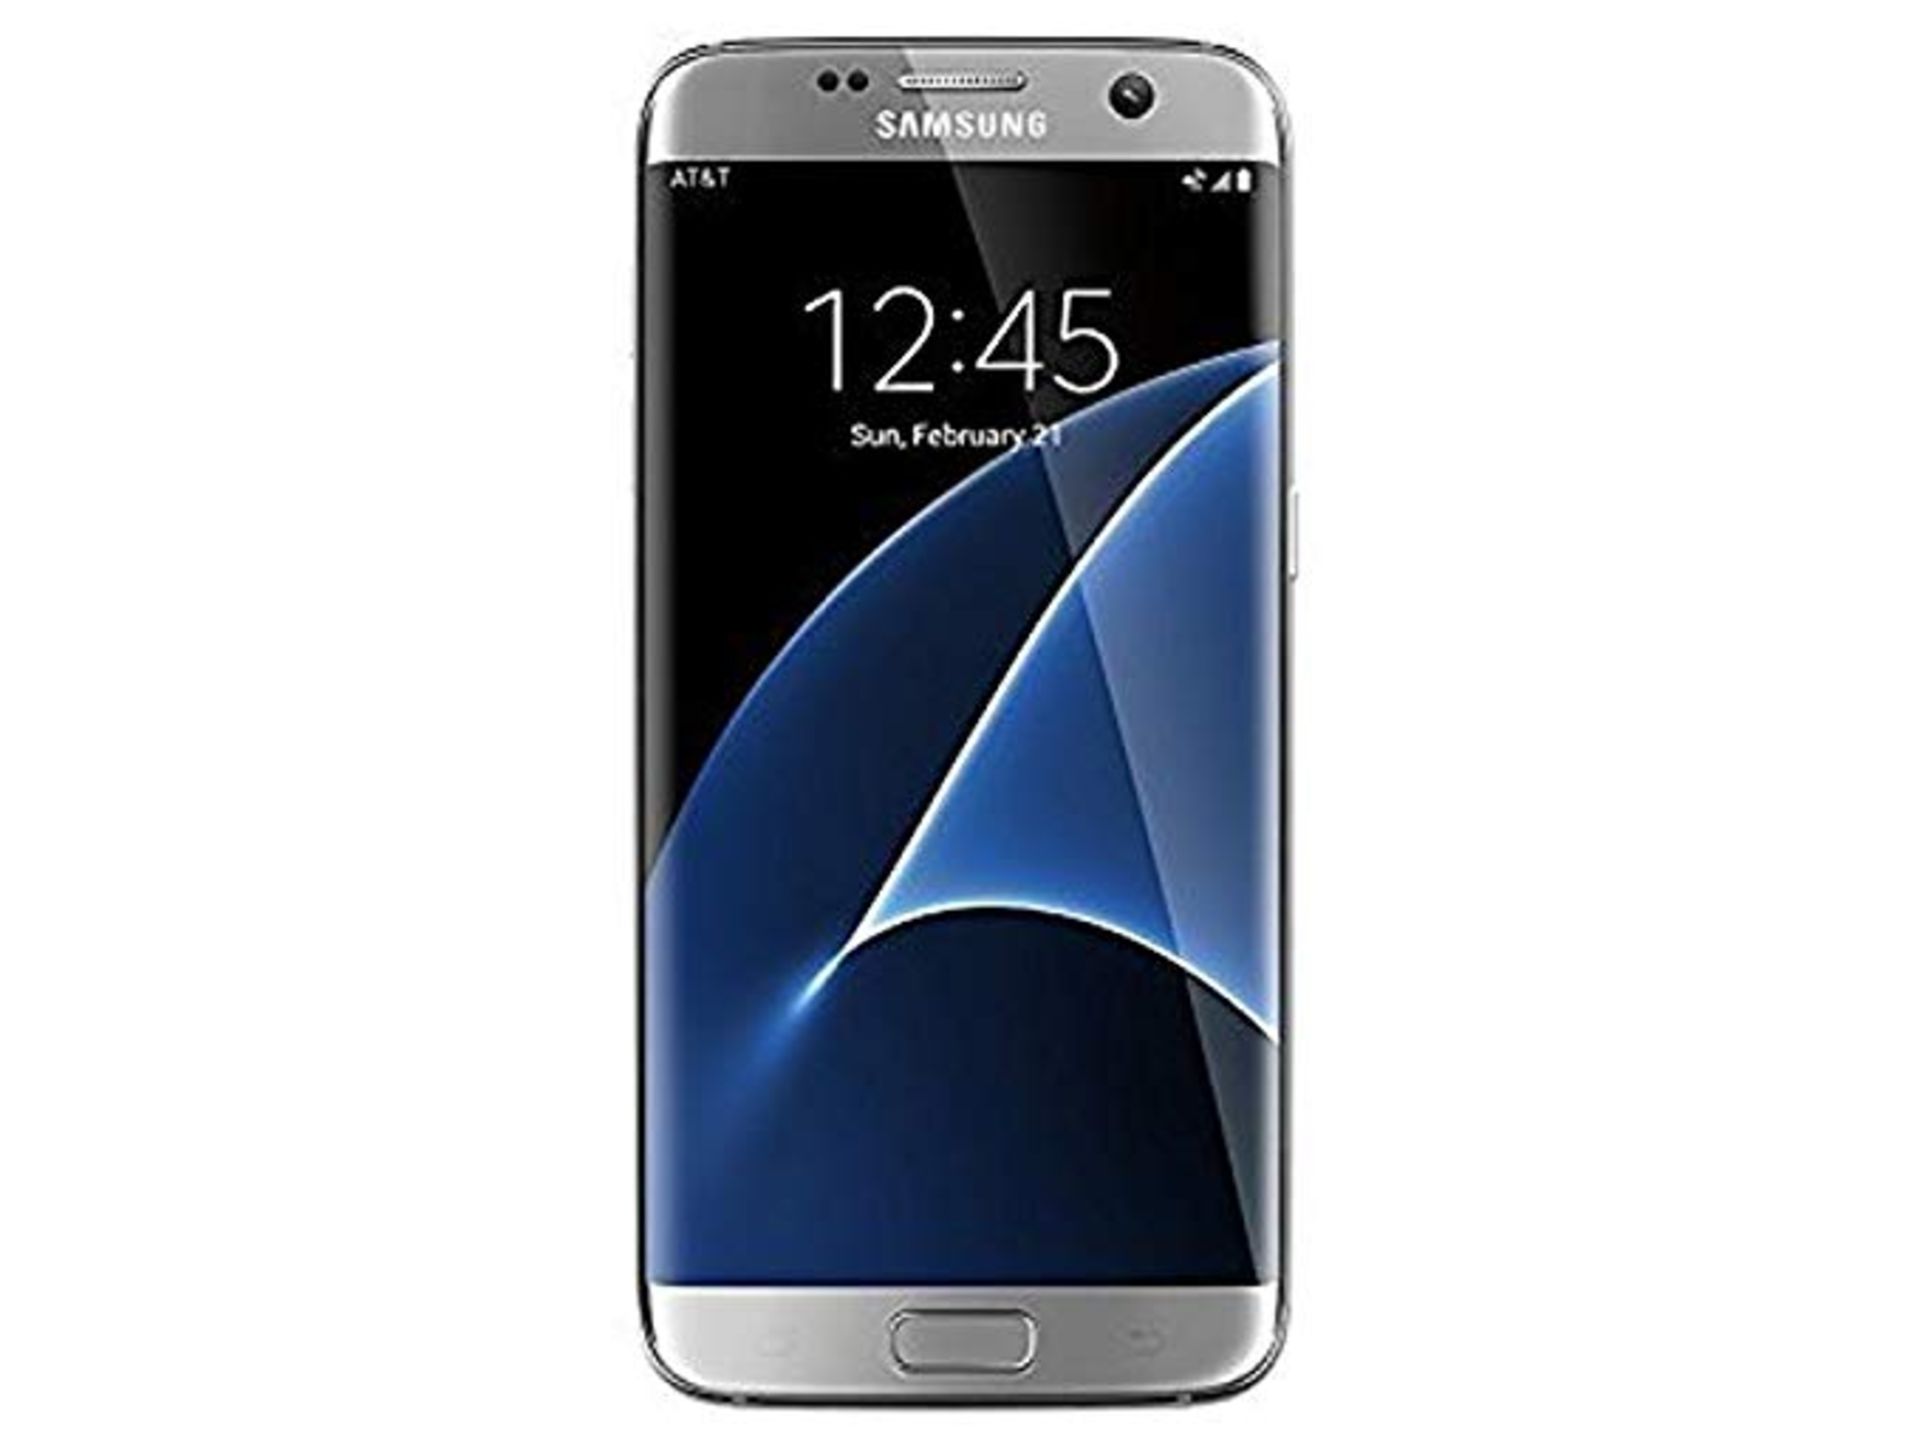 No VAT Grade A Samsung Galaxy S7 Edge (G935A/T/V/P) Colours May Vary - Item Available Approx 15